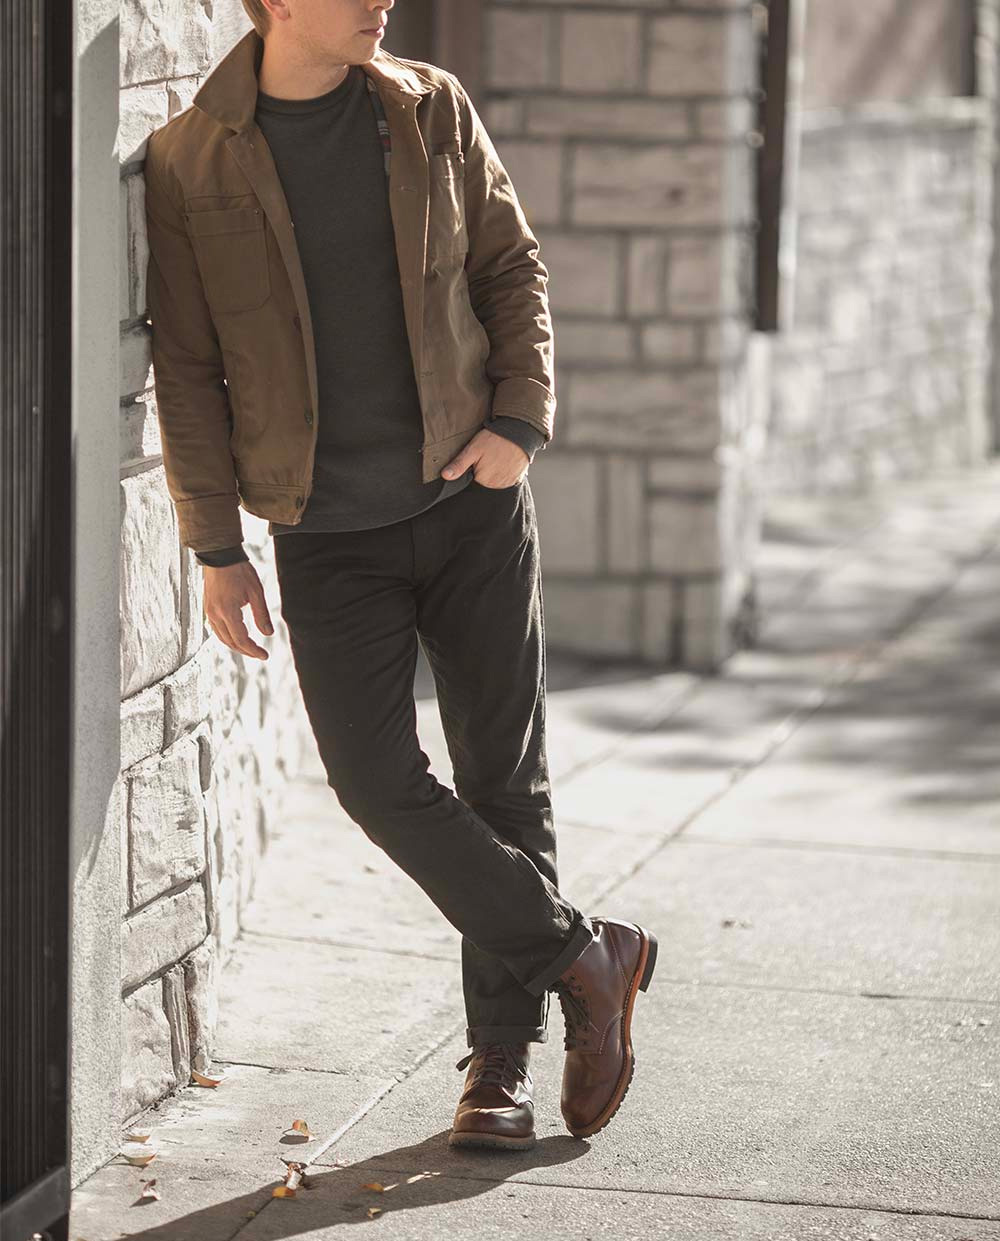 waxed cotton jacket outfit idea black jeans